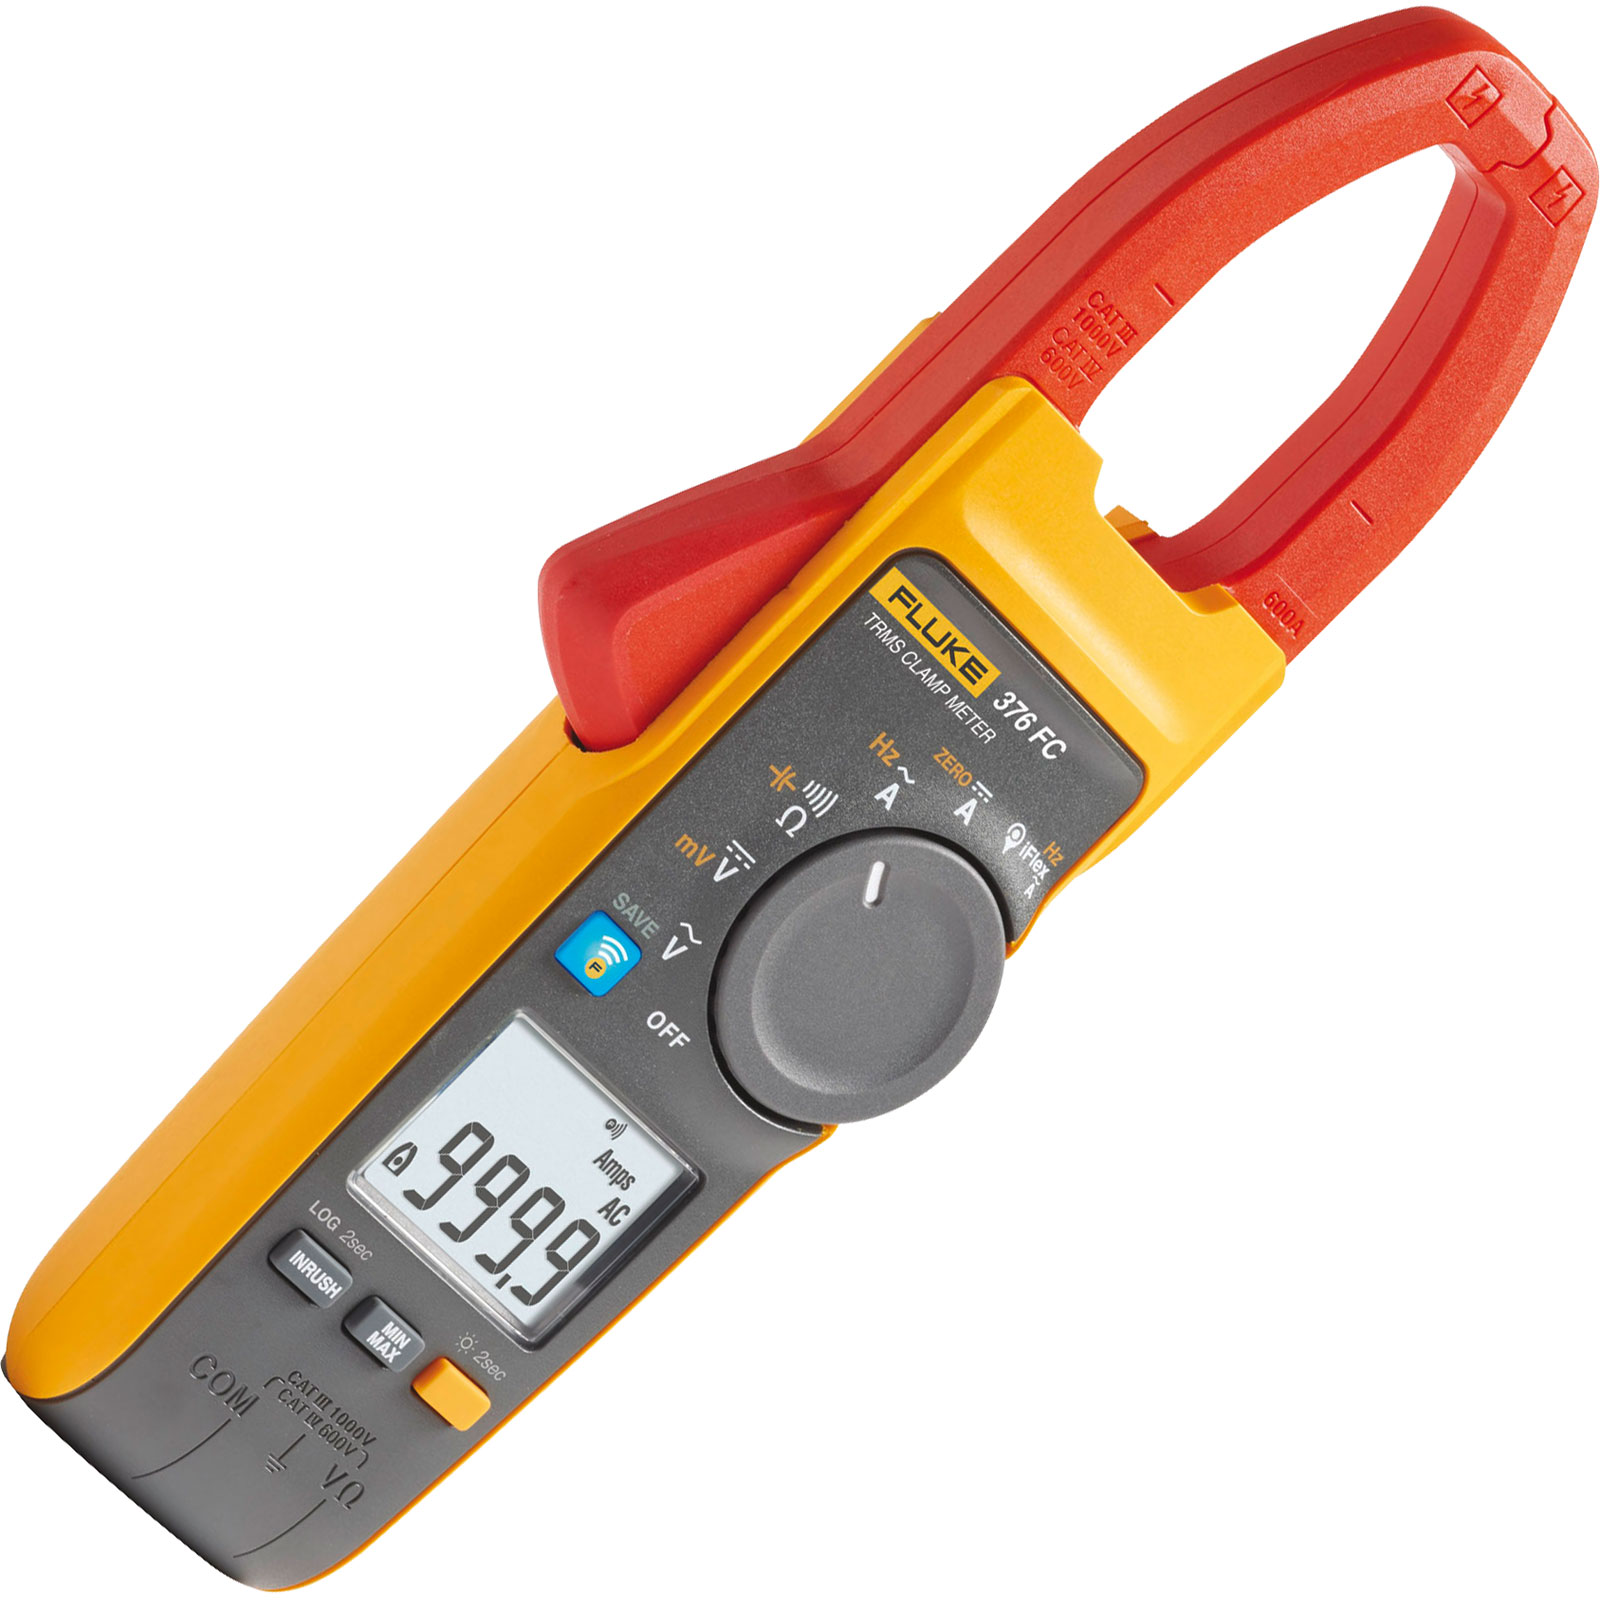 Fluke 376 FC True RMS AC/DC Clamp Meter Kit - Includes the IR-98